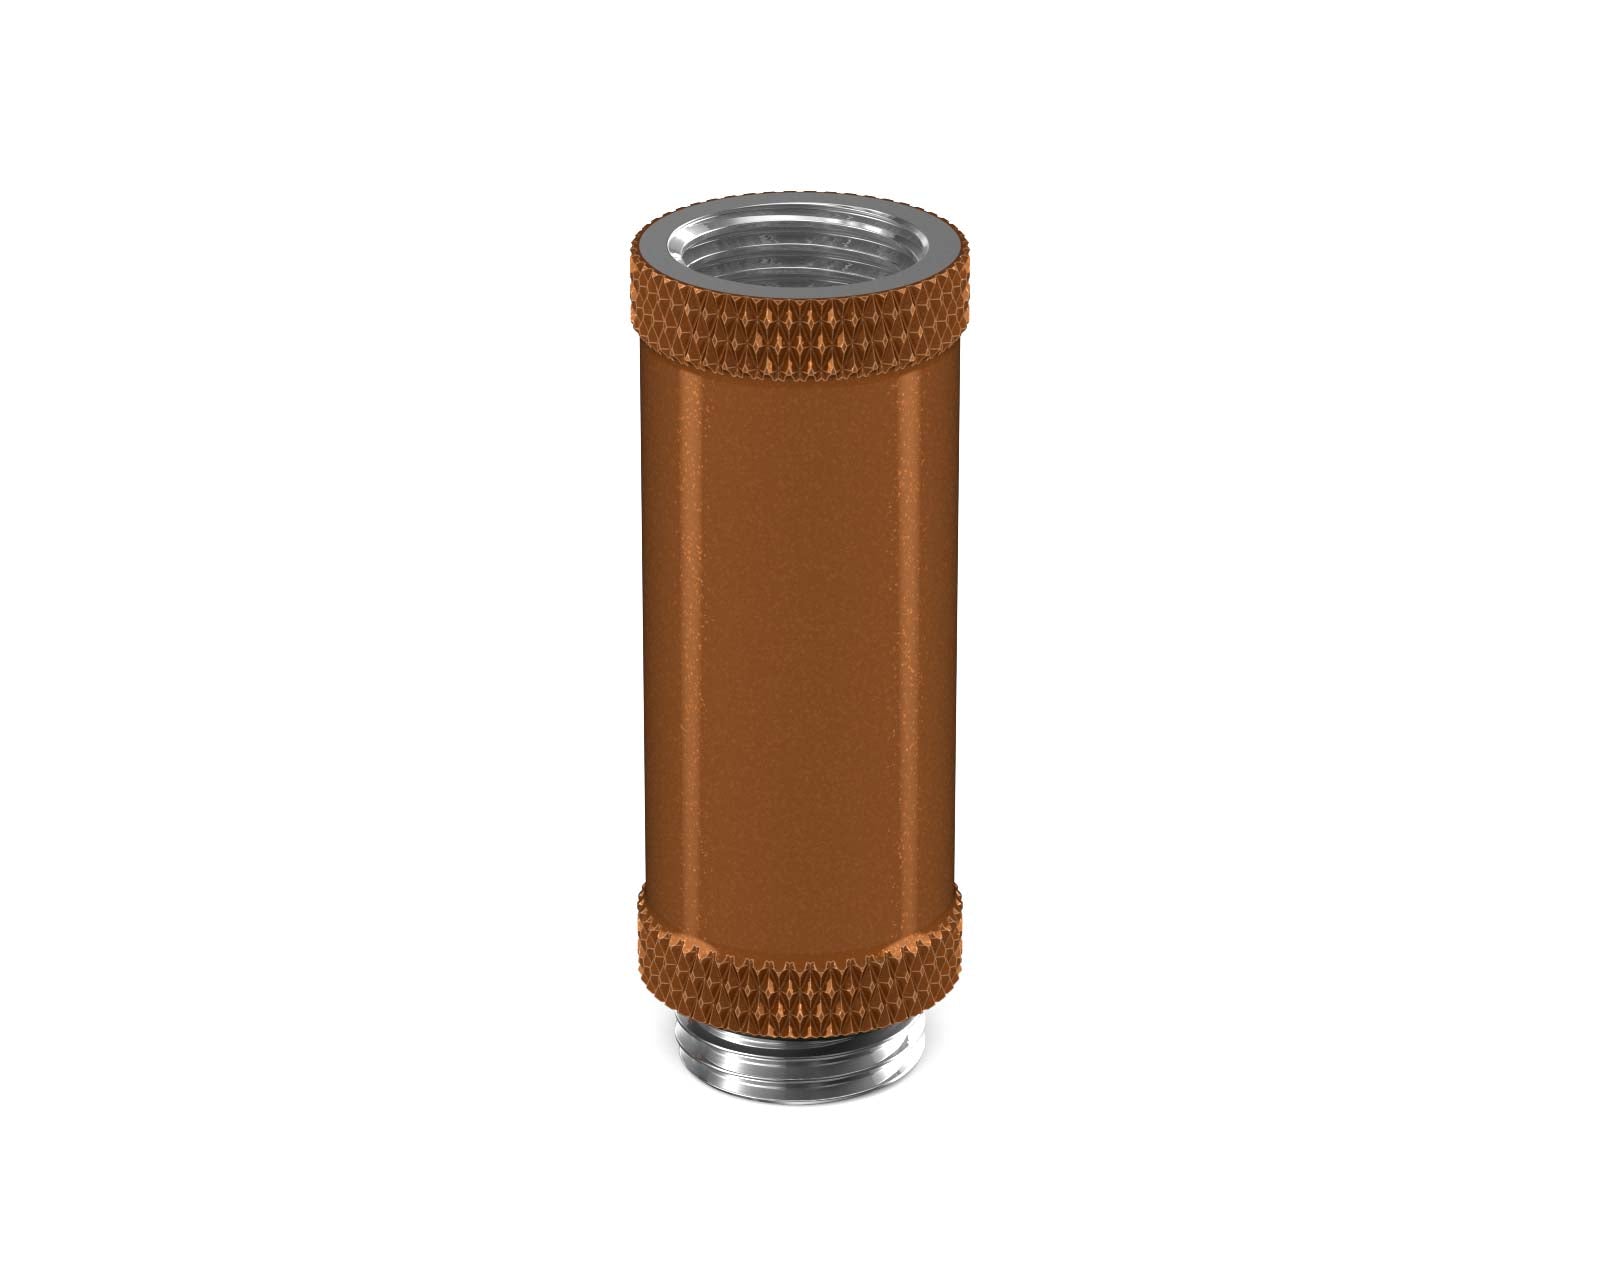 PrimoChill Male to Female G 1/4in. 40mm SX Extension Coupler - PrimoChill - KEEPING IT COOL Copper